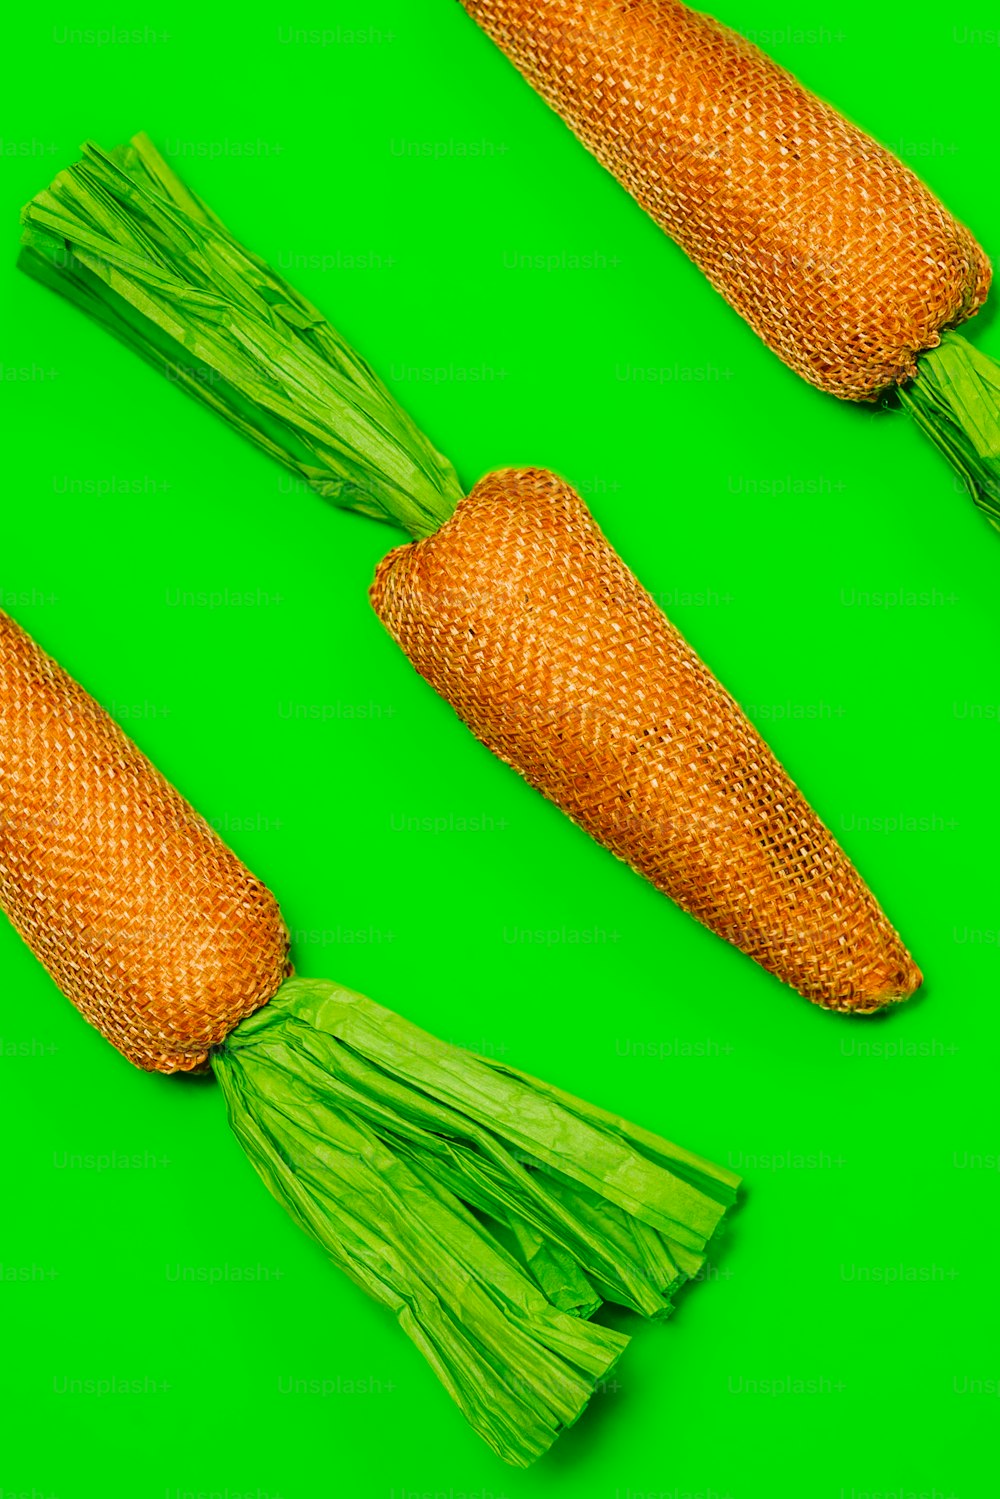 a group of three carrots sitting on top of a green surface